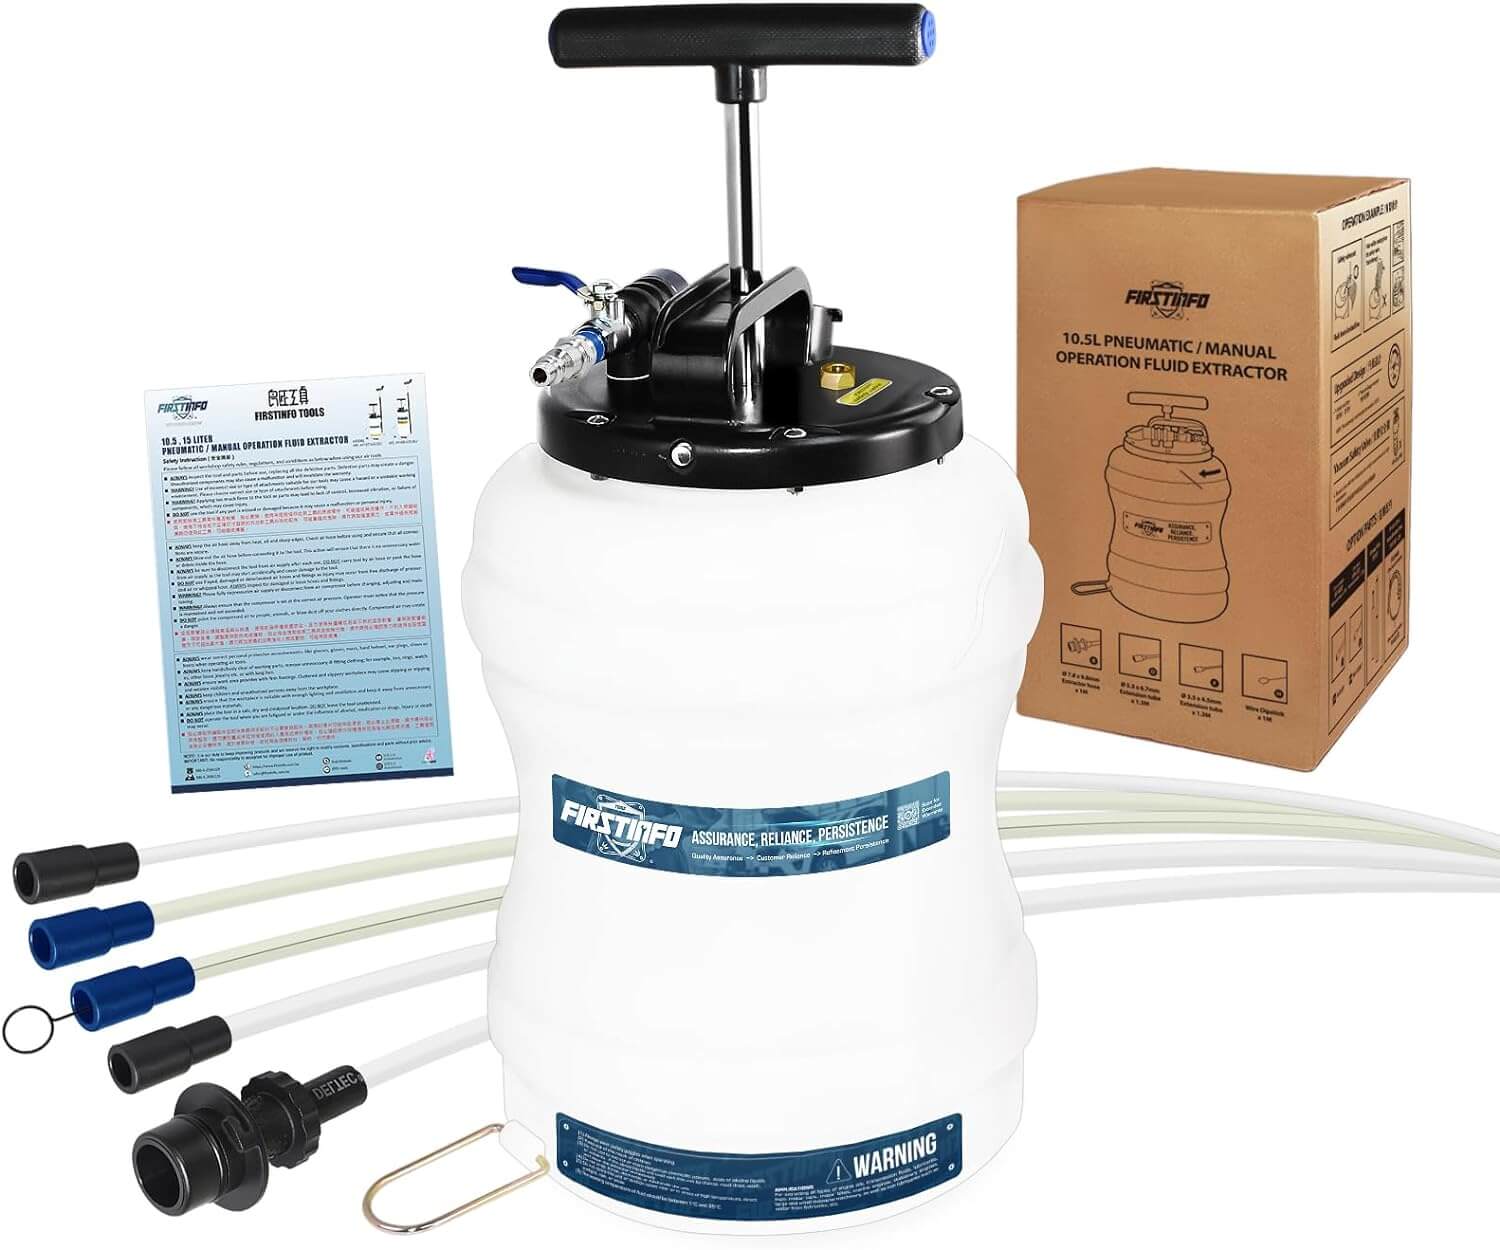 FIRSTINFO Patented 10.5L Manual/Pneumatic Oil Change Extractor Pump Review